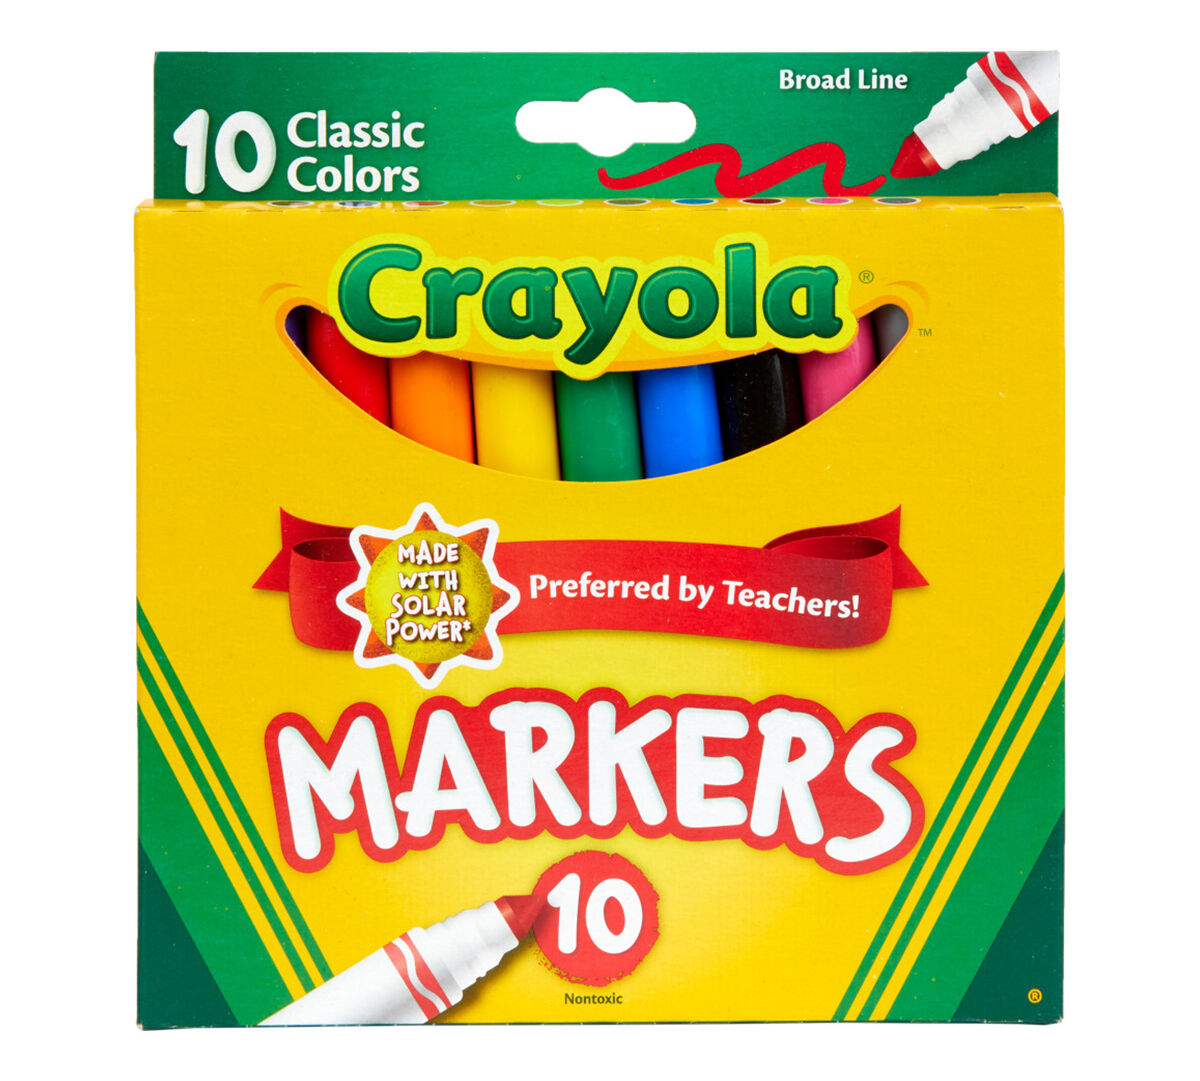 Crayola 58-7722 Classic Color Broad Line Markers 10 Count 